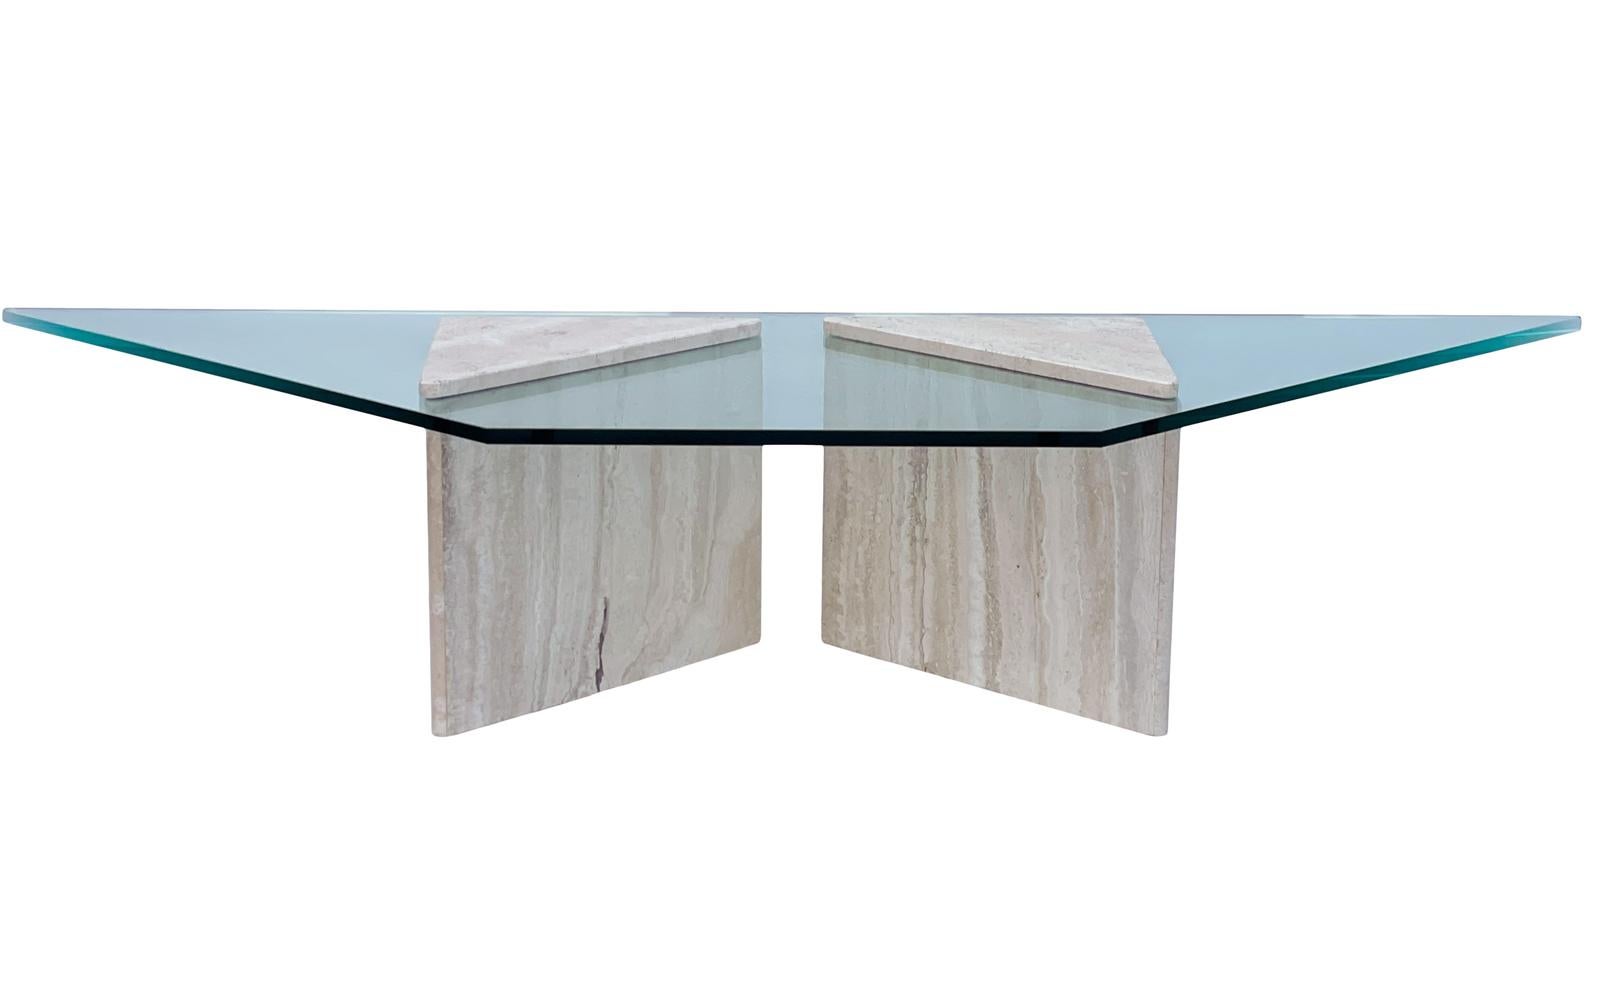 An extra long coffee table from Italy circa 1970's. It features 2 triangular travertine pedestals supporting a thick clear glass top.